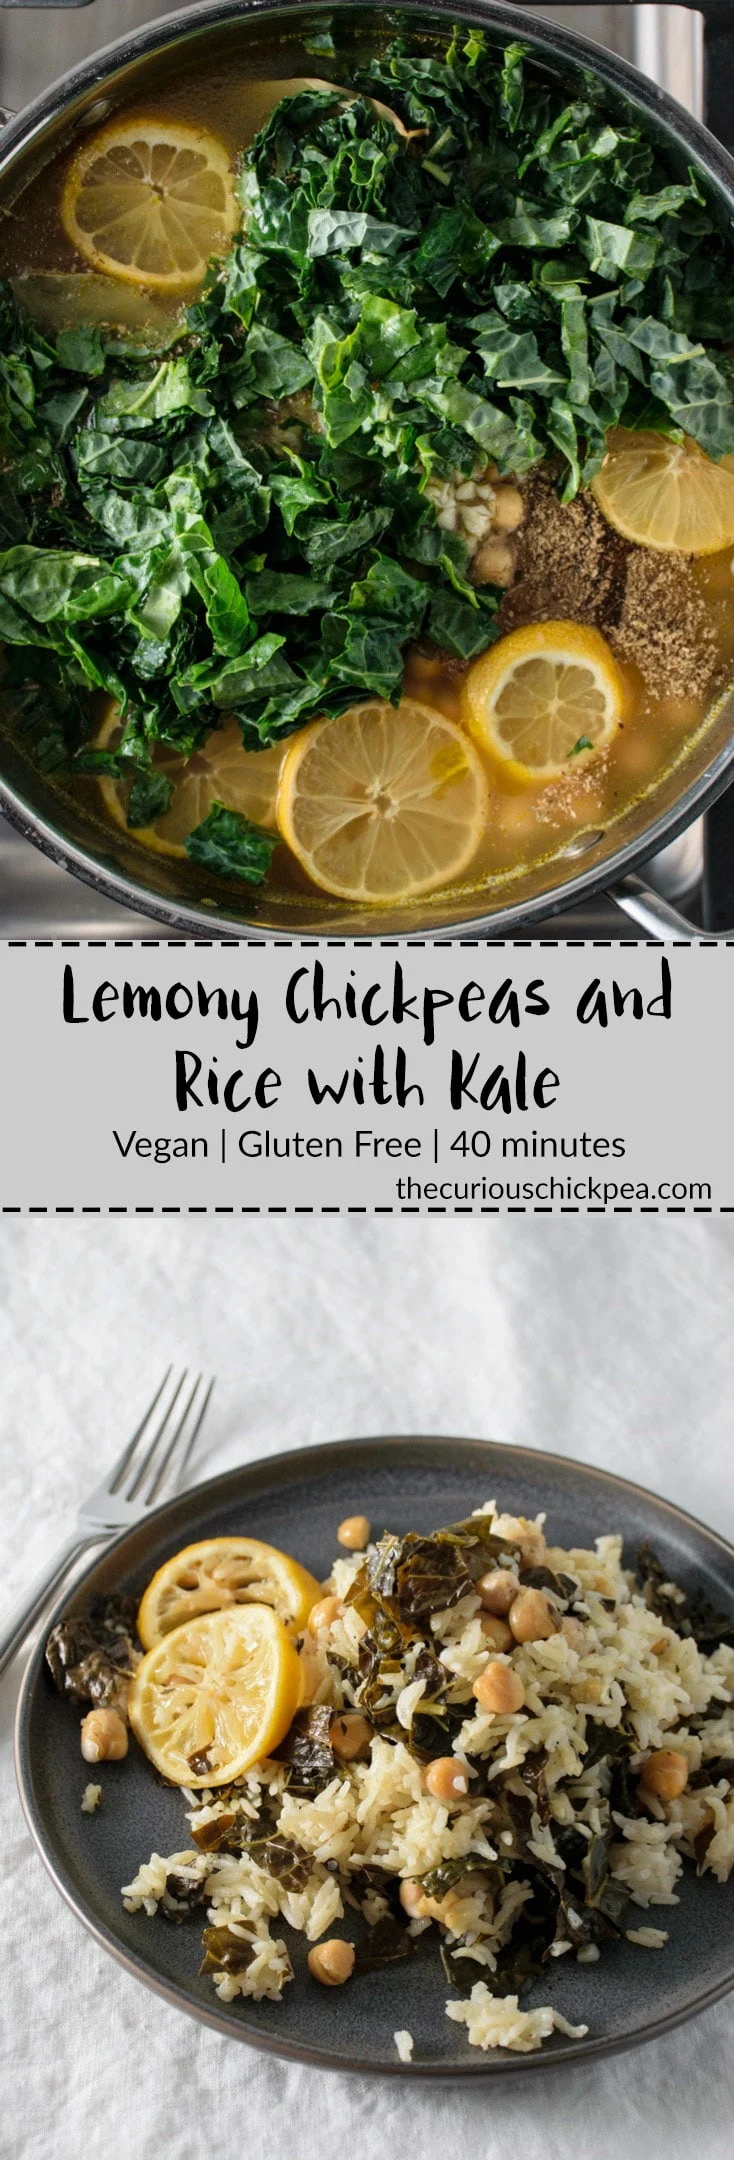 Lemon Chickpeas and Rice with Kale | Vegan, gluten free recipe, ready in 40 minutes. Delicious, simple comfort food at it's best. | thecuriouschickpea.com #vegan #recipe